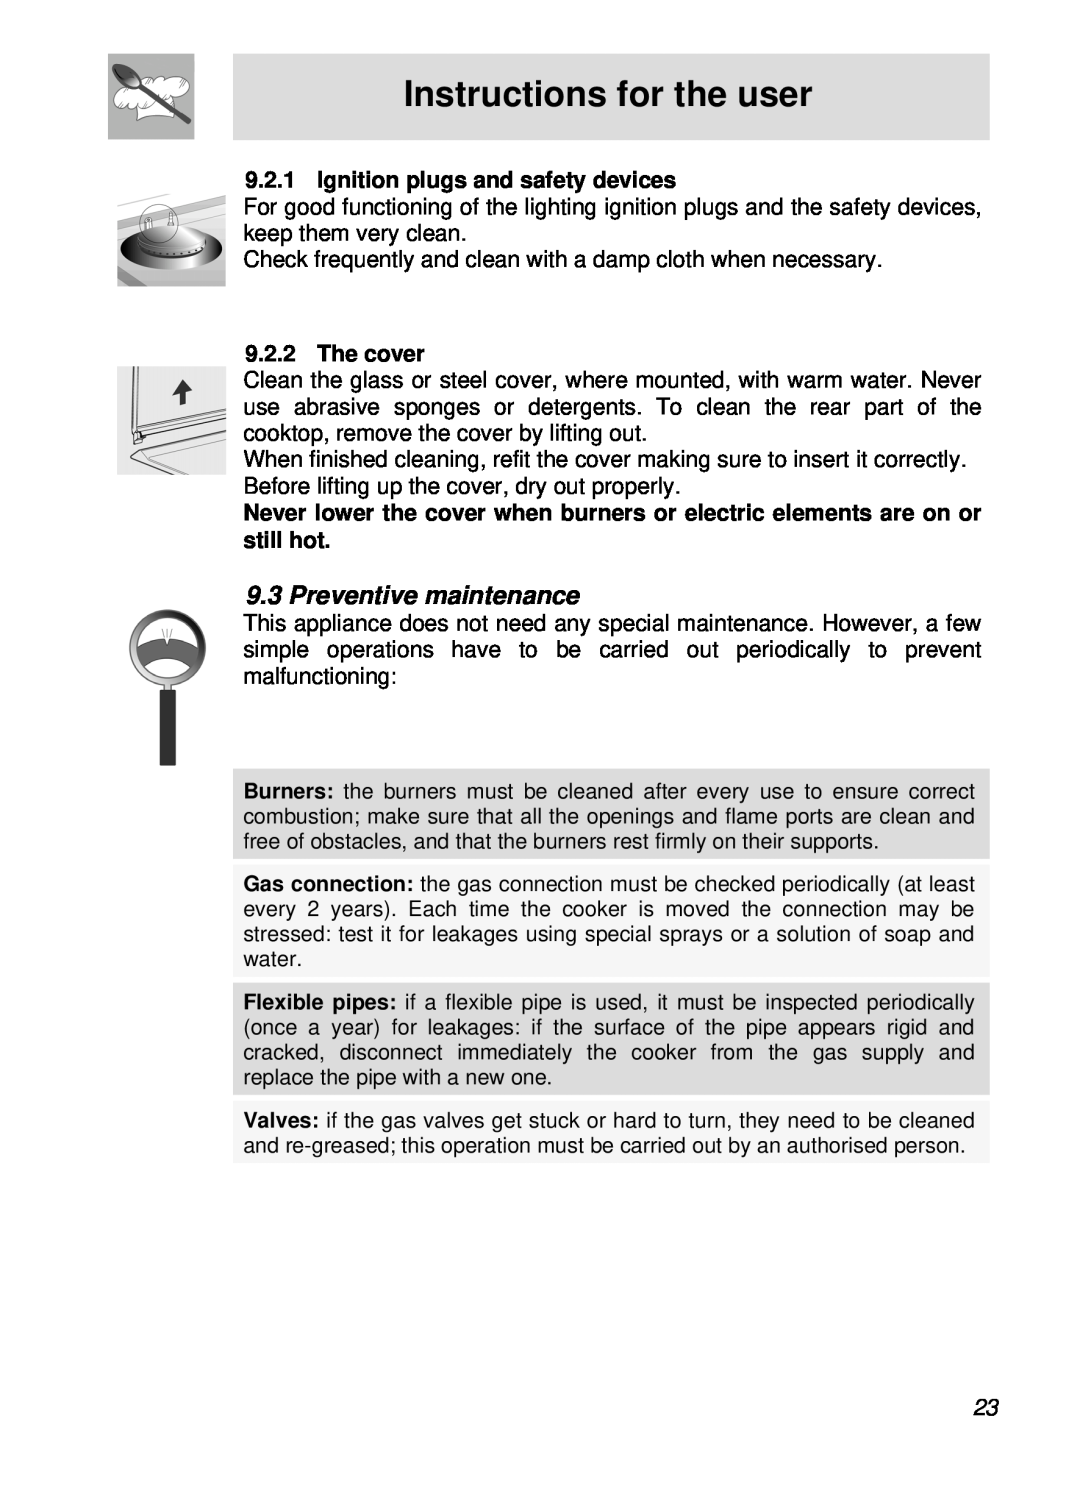 Smeg cooktop, CIR60X manual Preventive maintenance, Instructions for the user, Ignition plugs and safety devices, The cover 